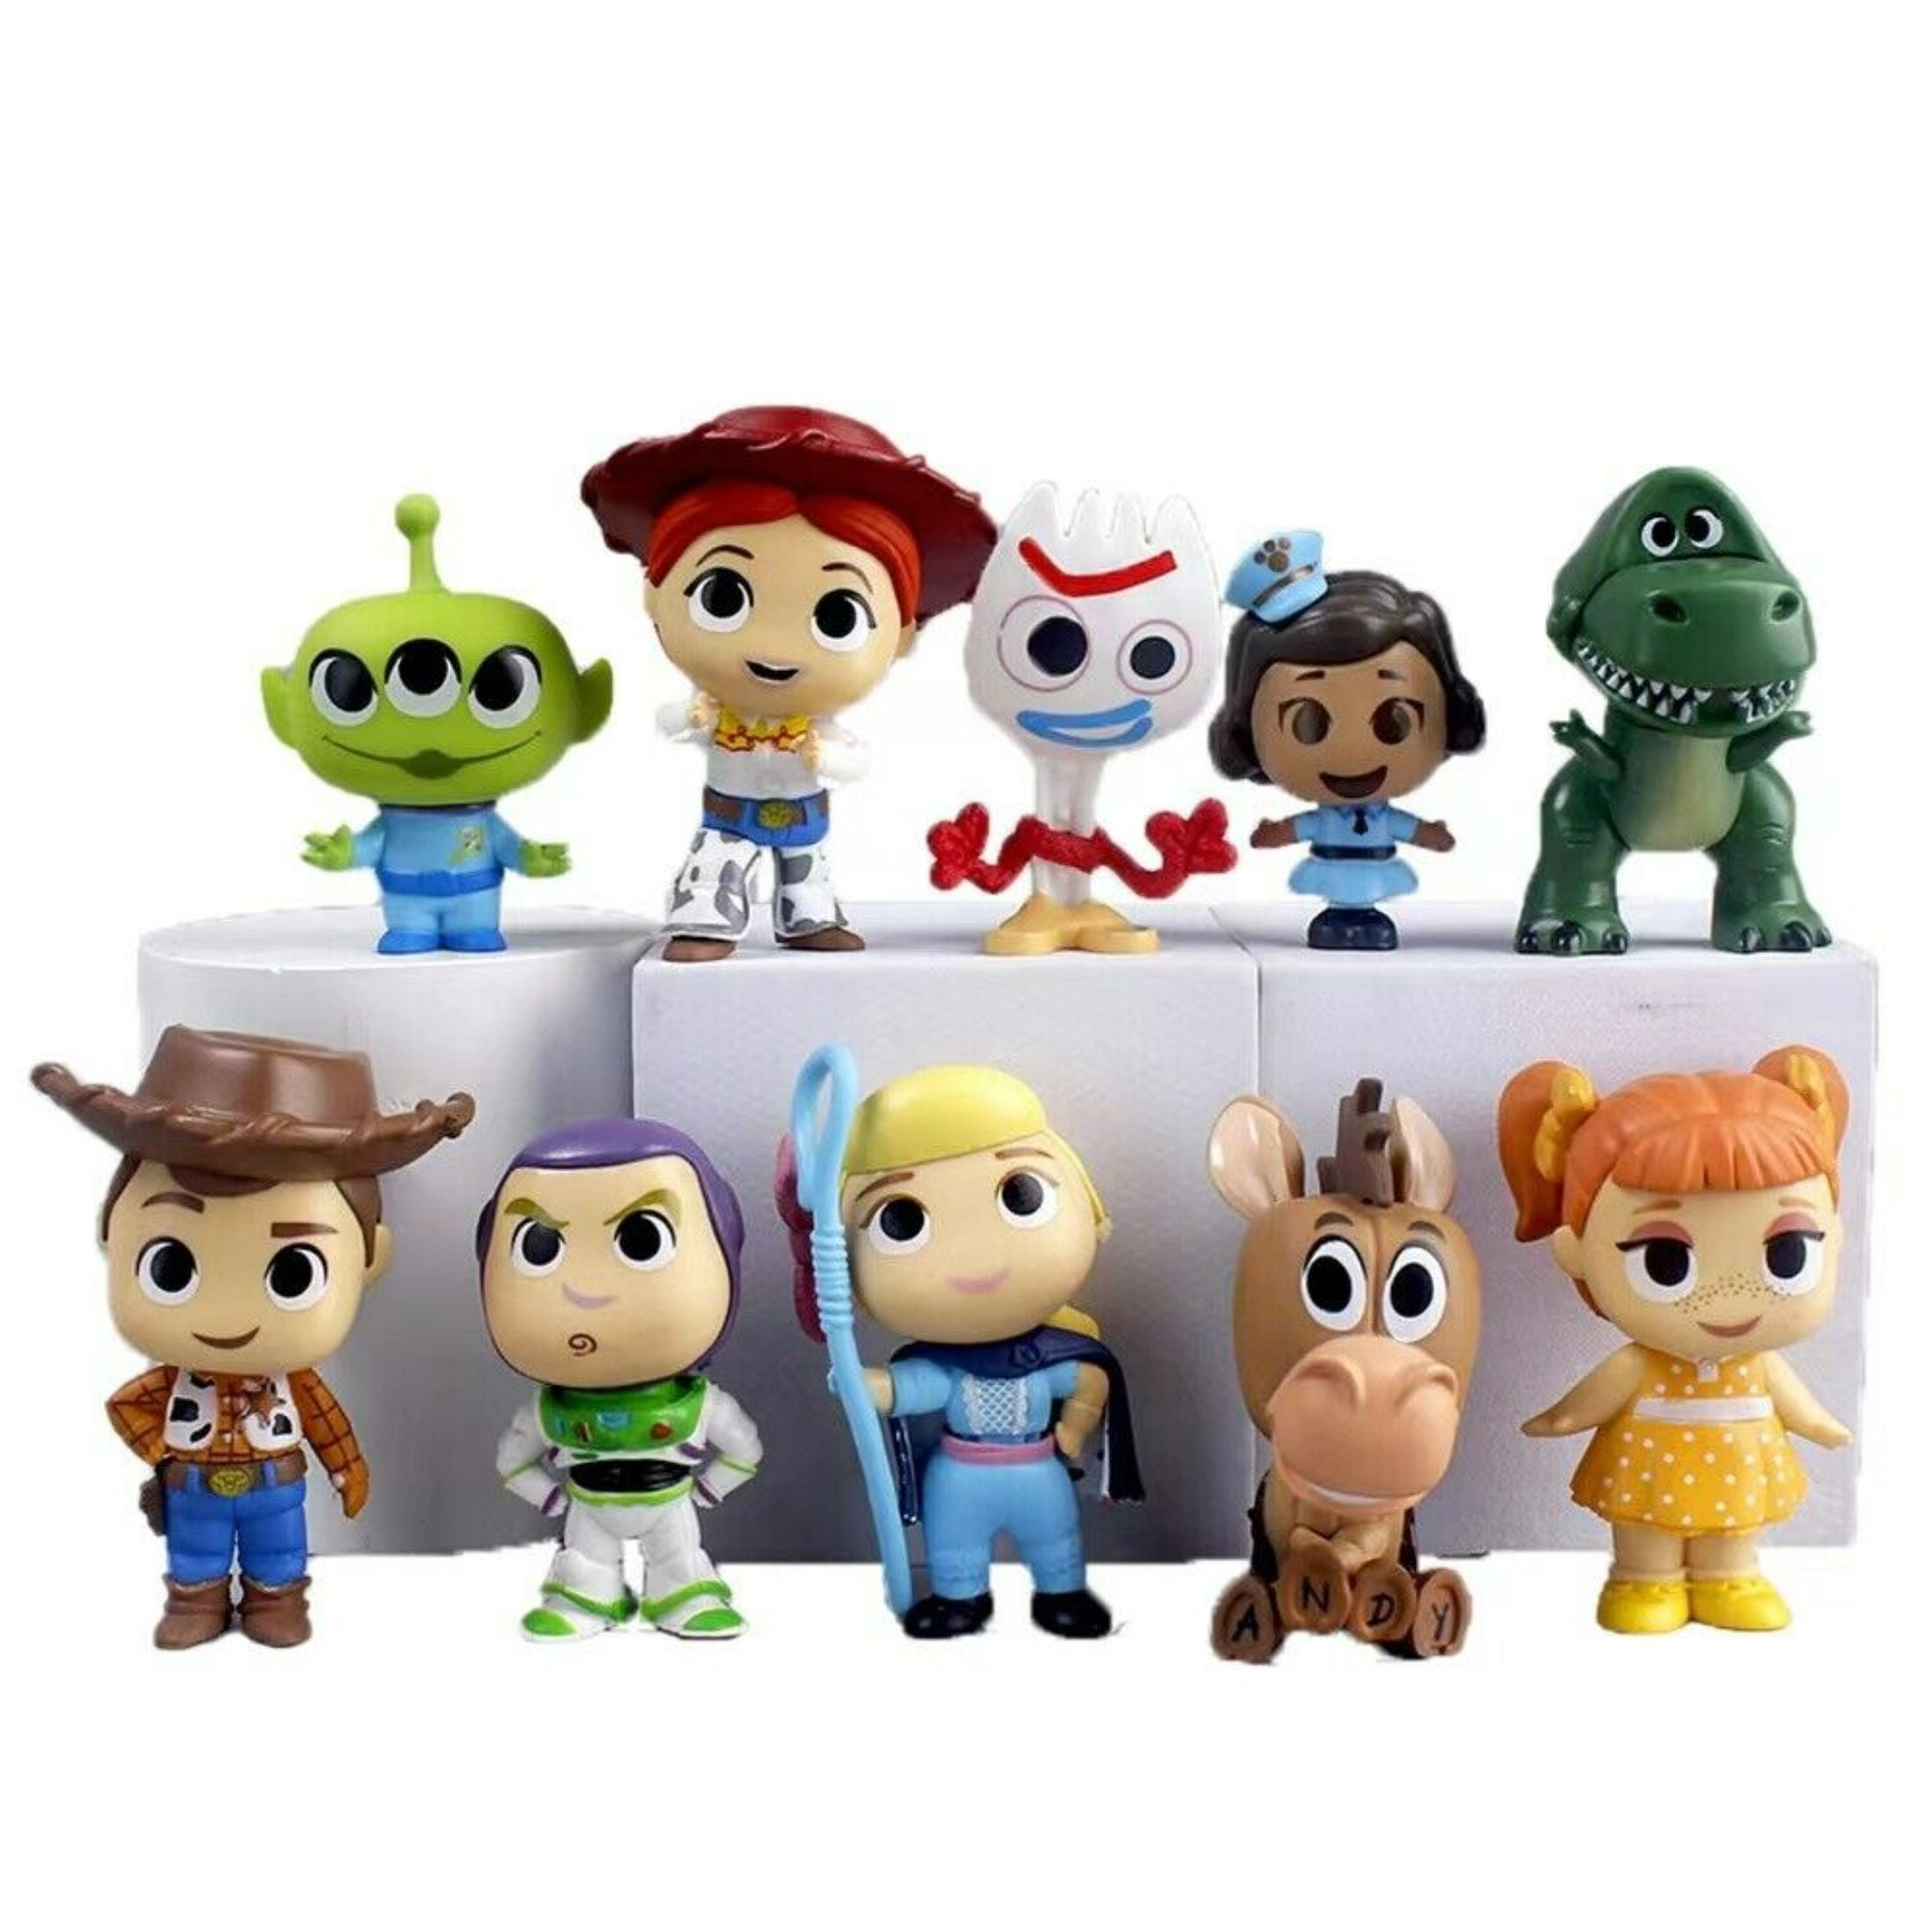 Toy Story Lunch Boxes  Woody toy story, Toy story party, Toy